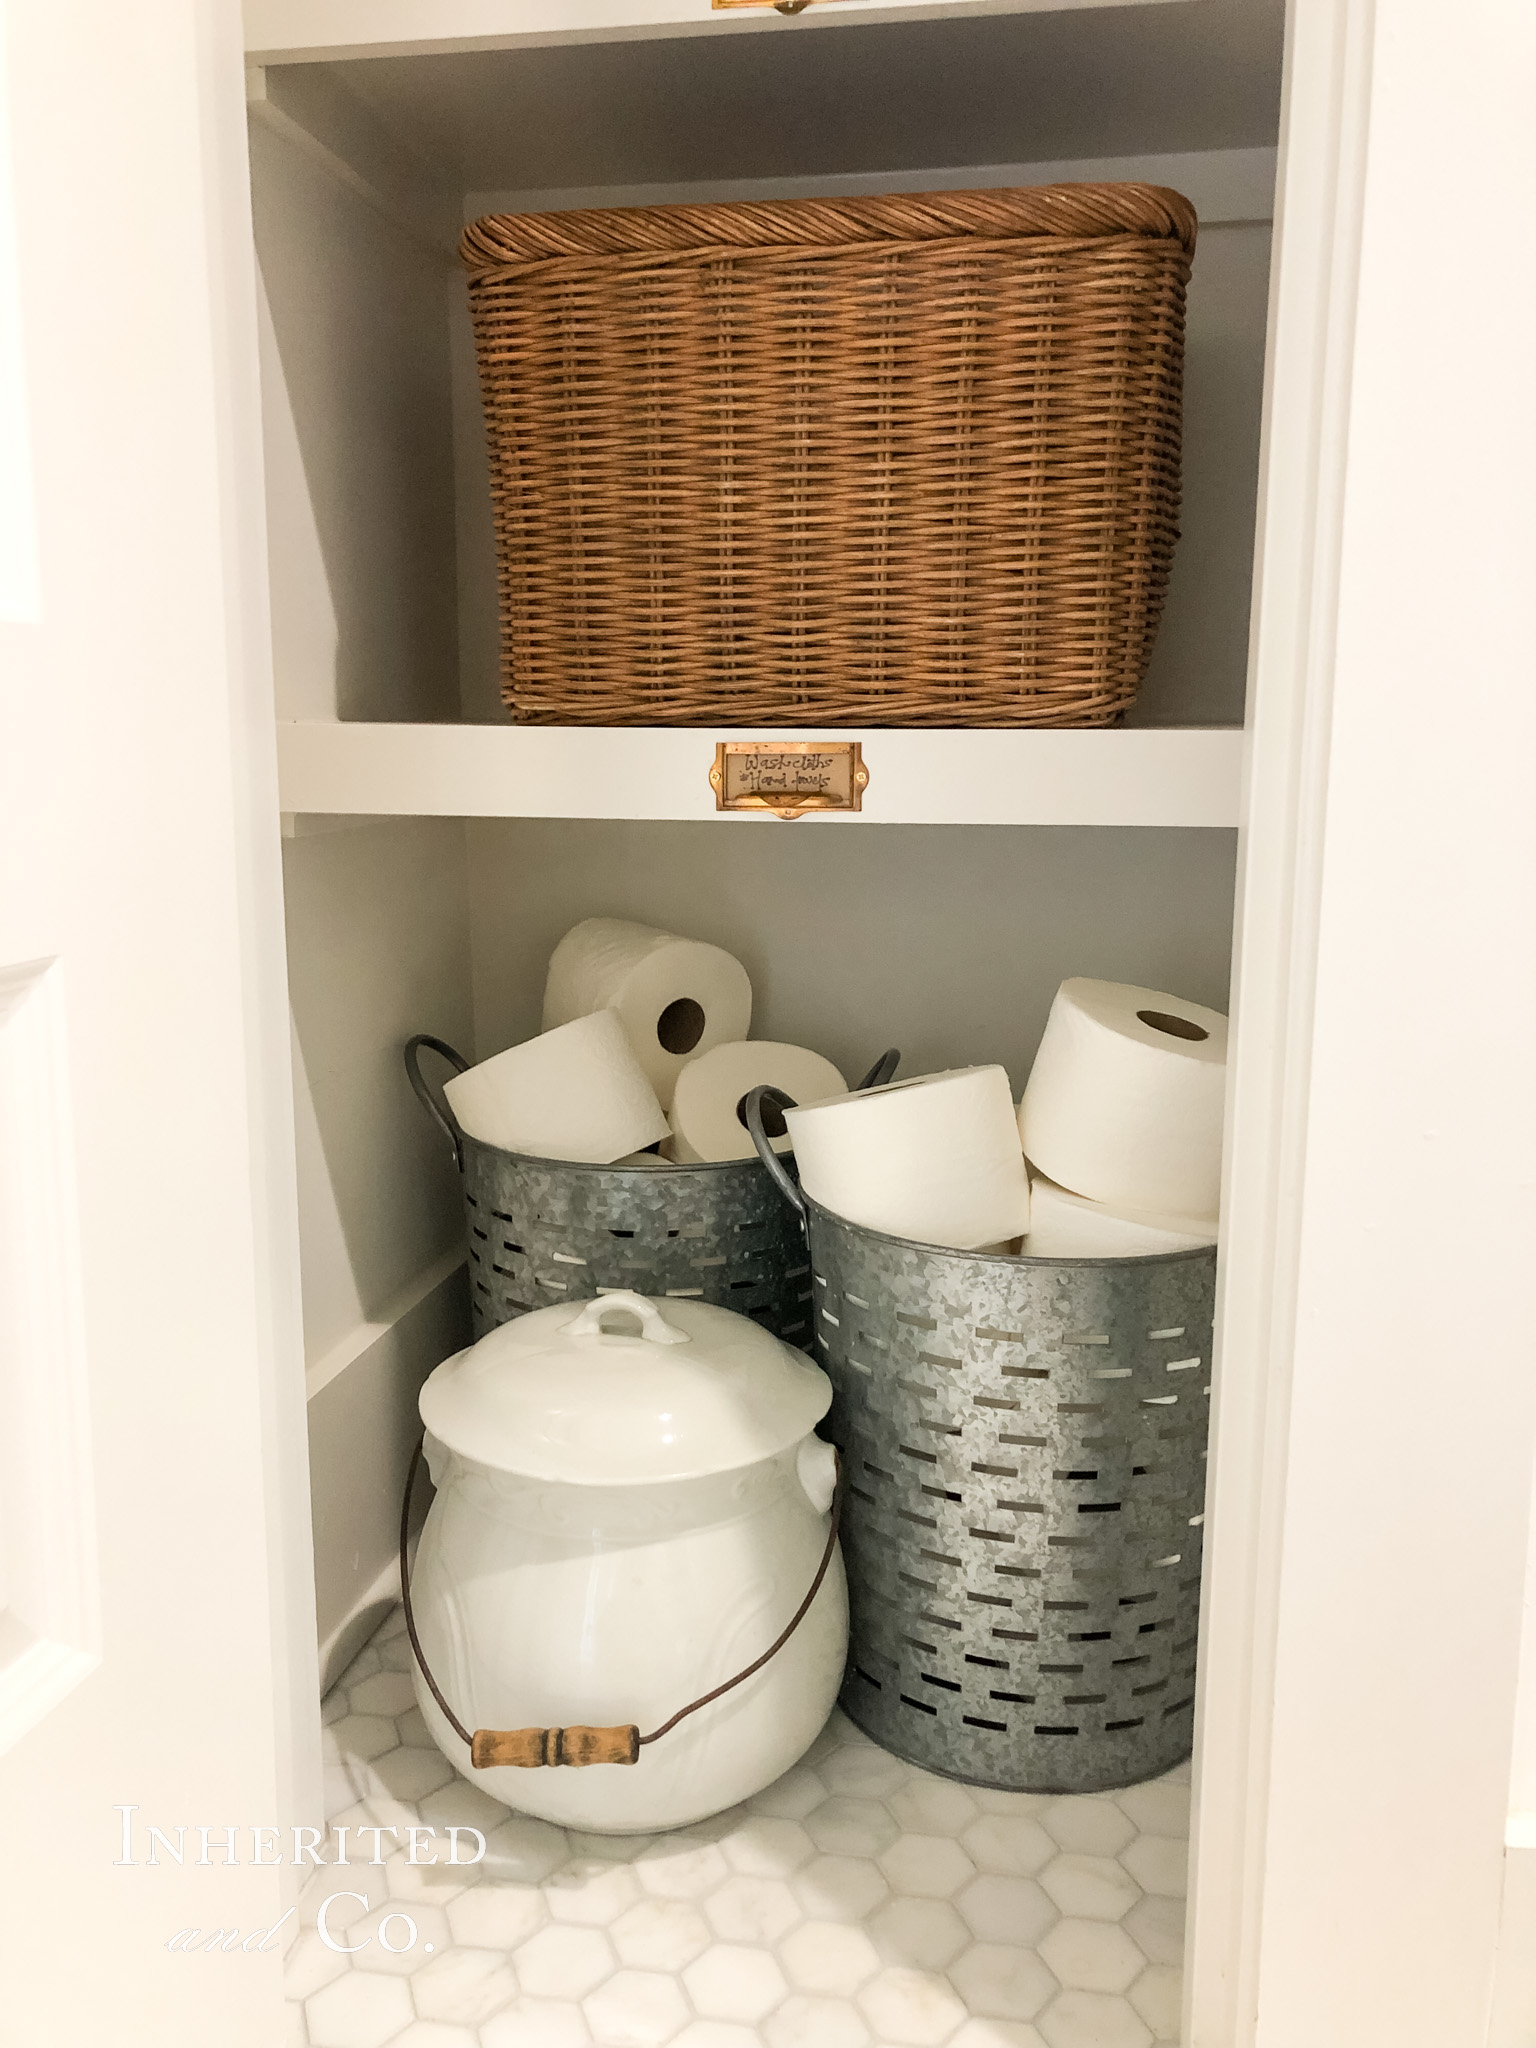 Towel Closet Organization with Antique Ironstone and Rattan Baskets